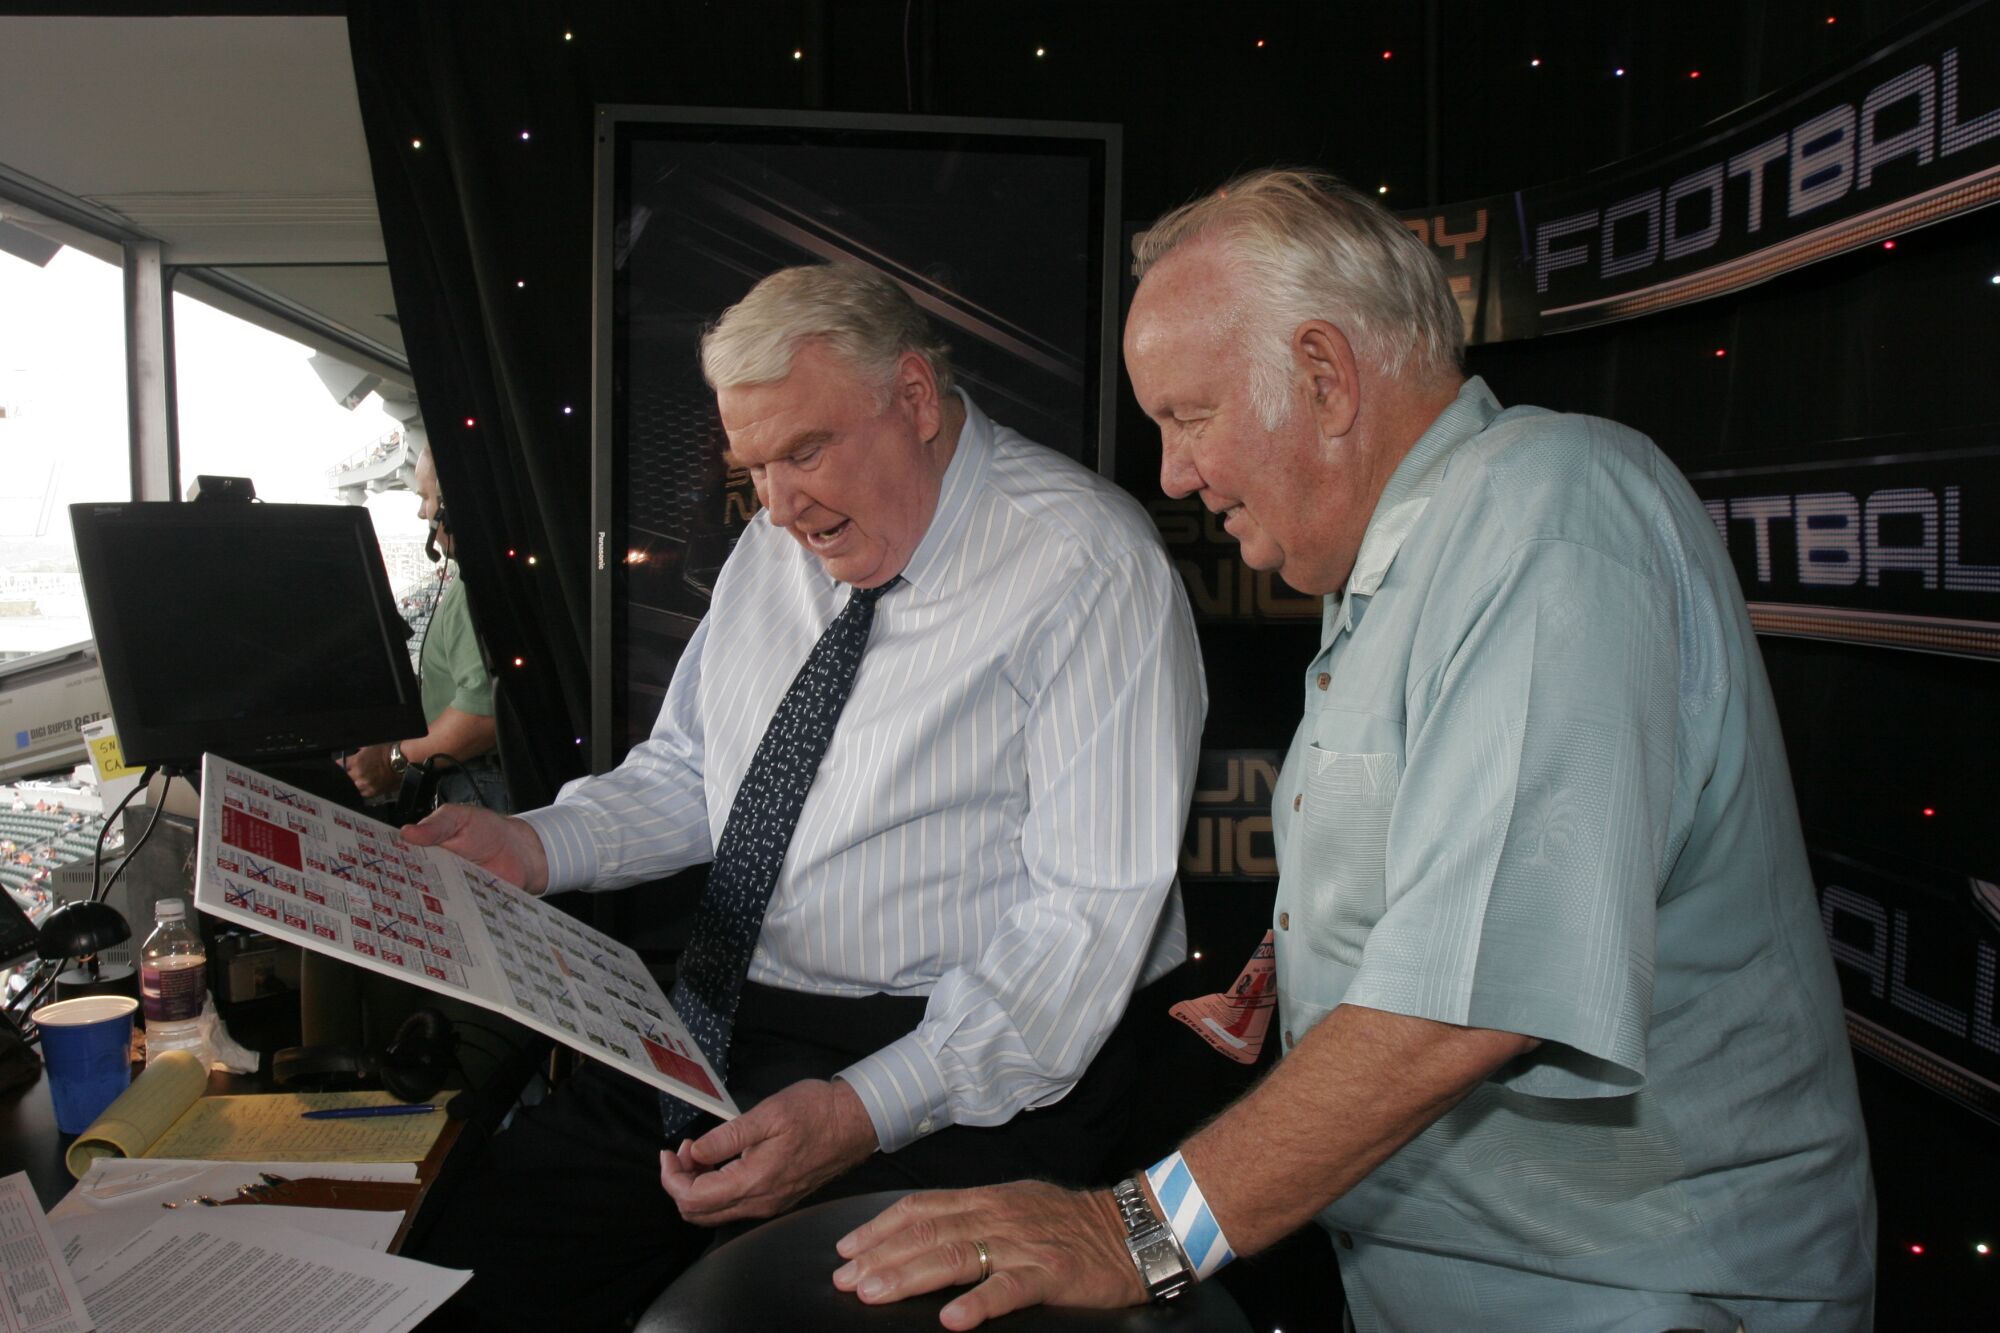 NFL legend John Madden, left, and former Rams and USC coach John Robinson spend time together.